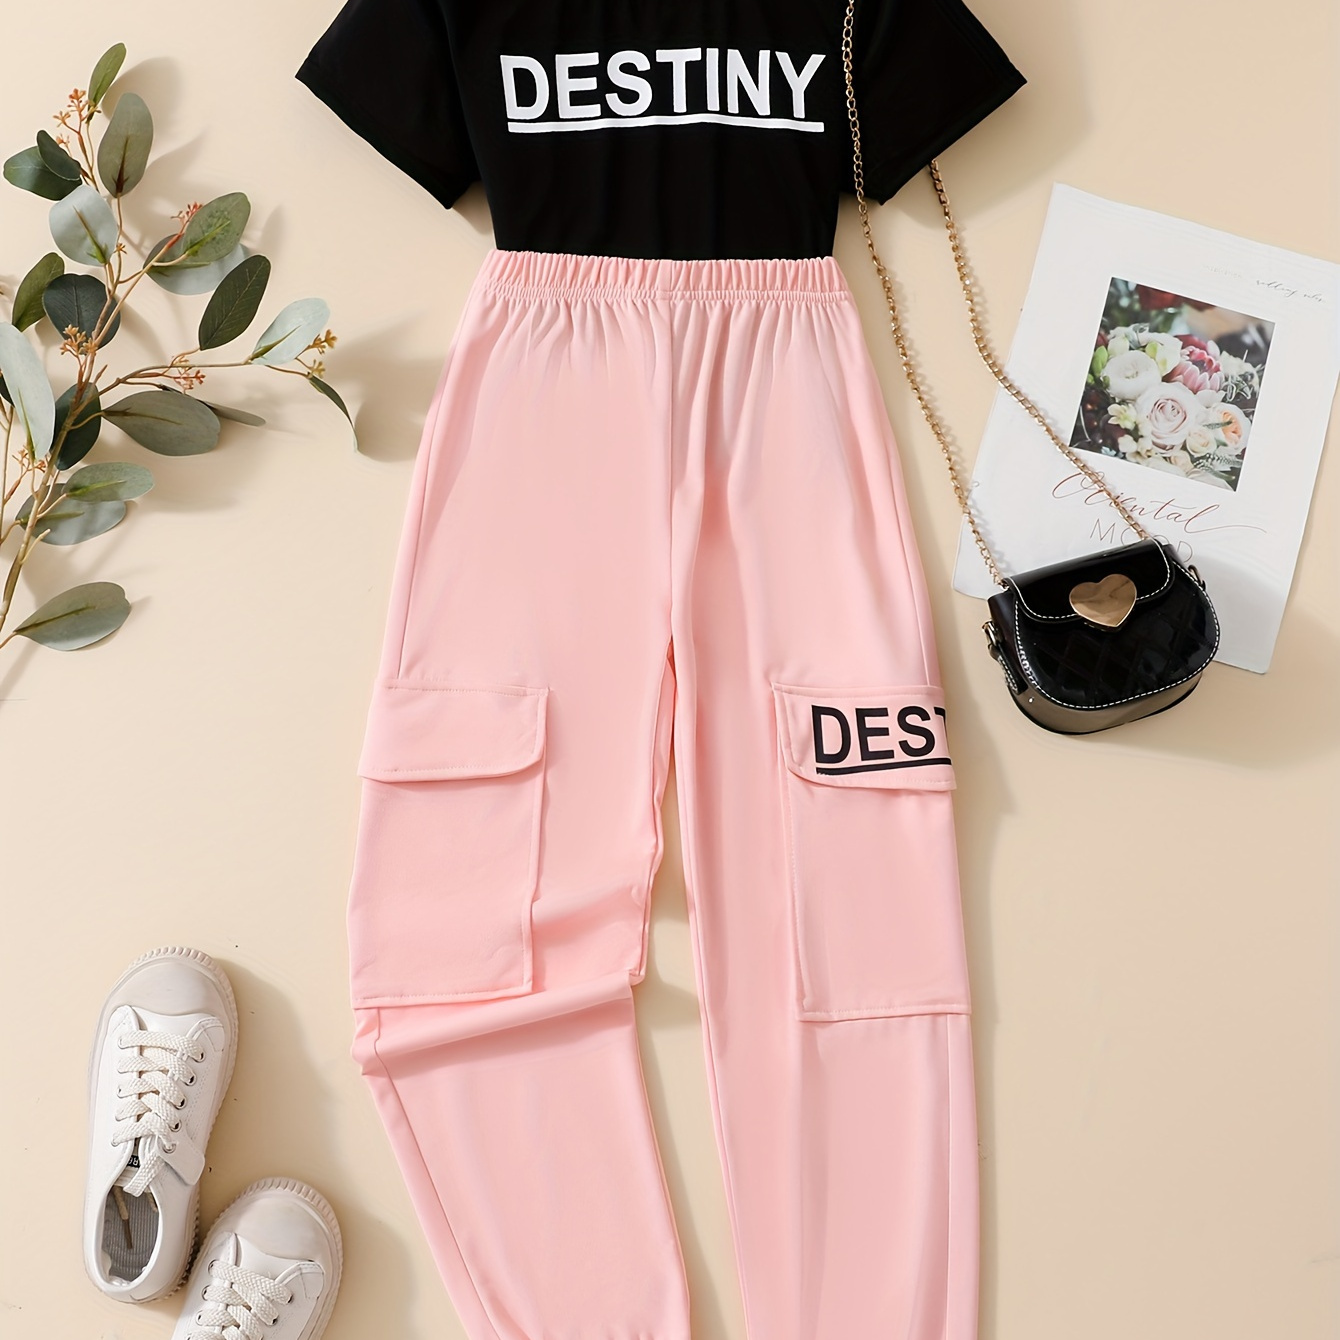 

2pcs Girls Destiny Print Outfits Casual & Comfy Sets For Spring Summer Fall Party Gift